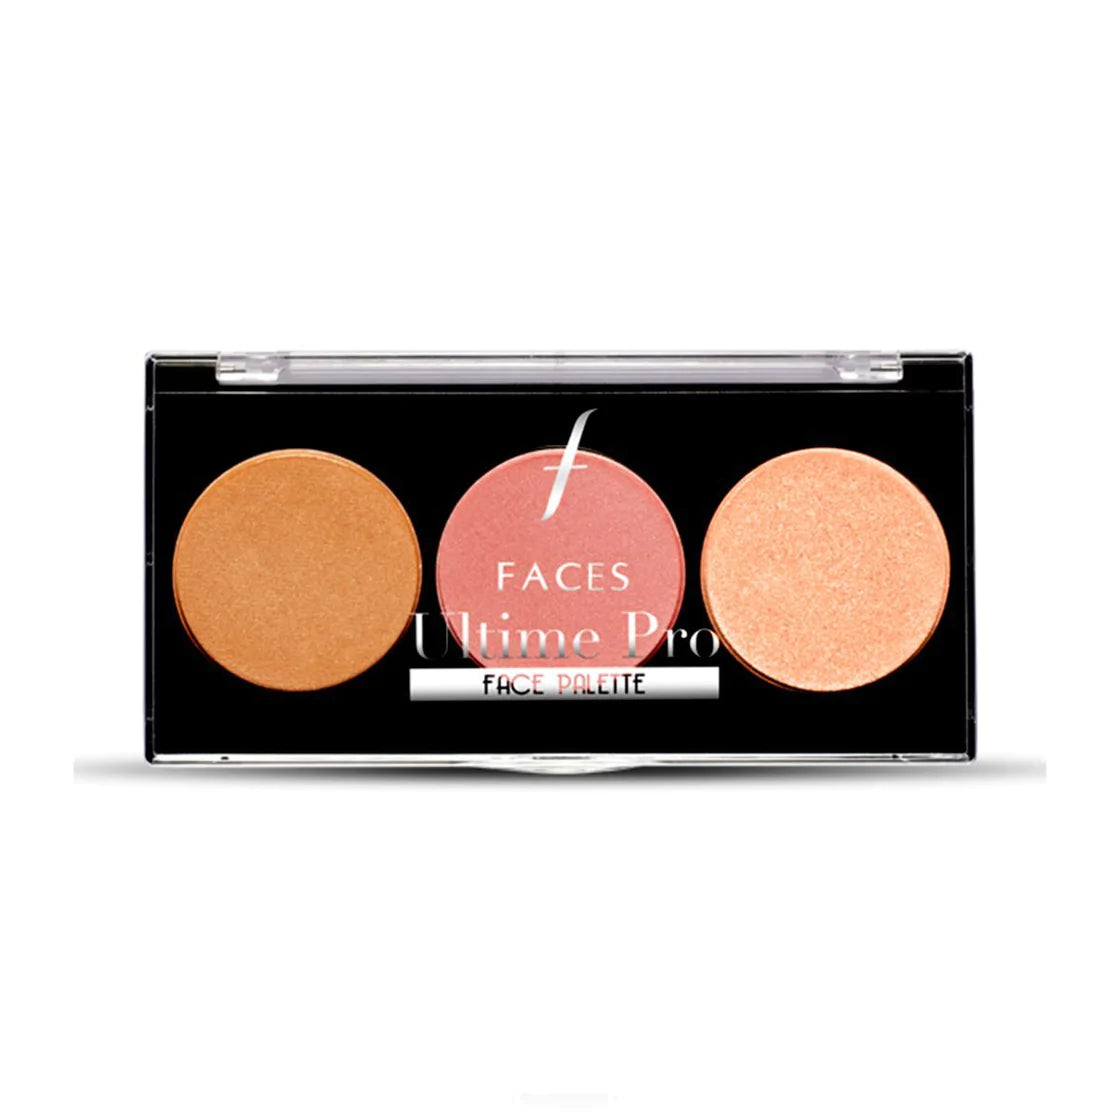 Faces Canada Ultime Pro Face Palette 3 In 1 - (12 Gm)-2